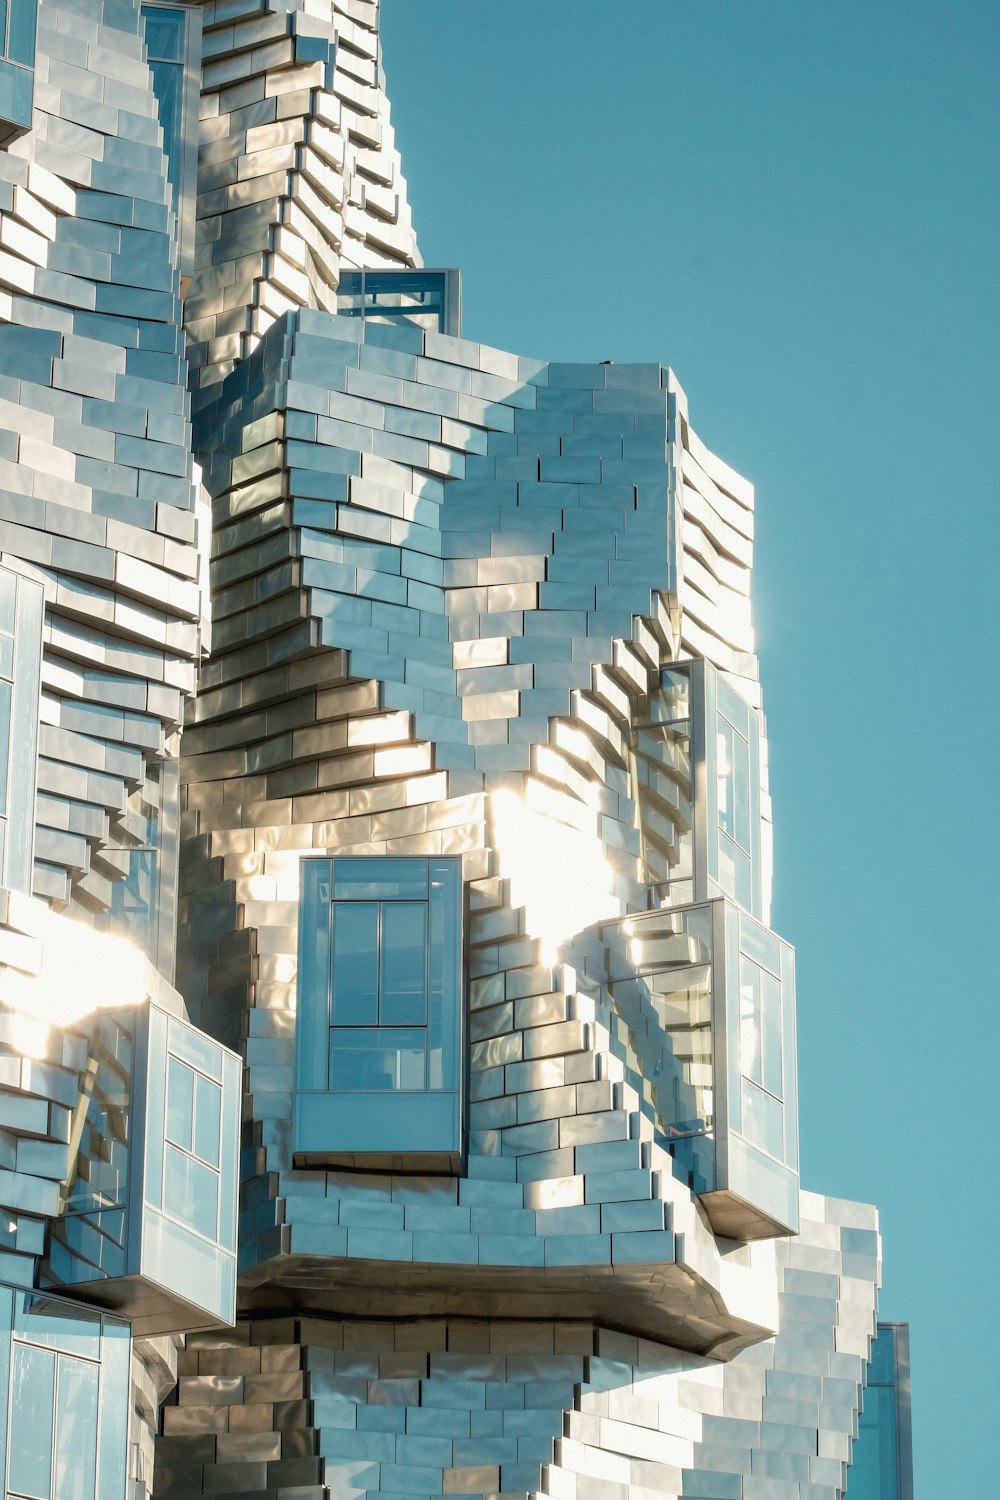 a sculpture of a person made out of windows